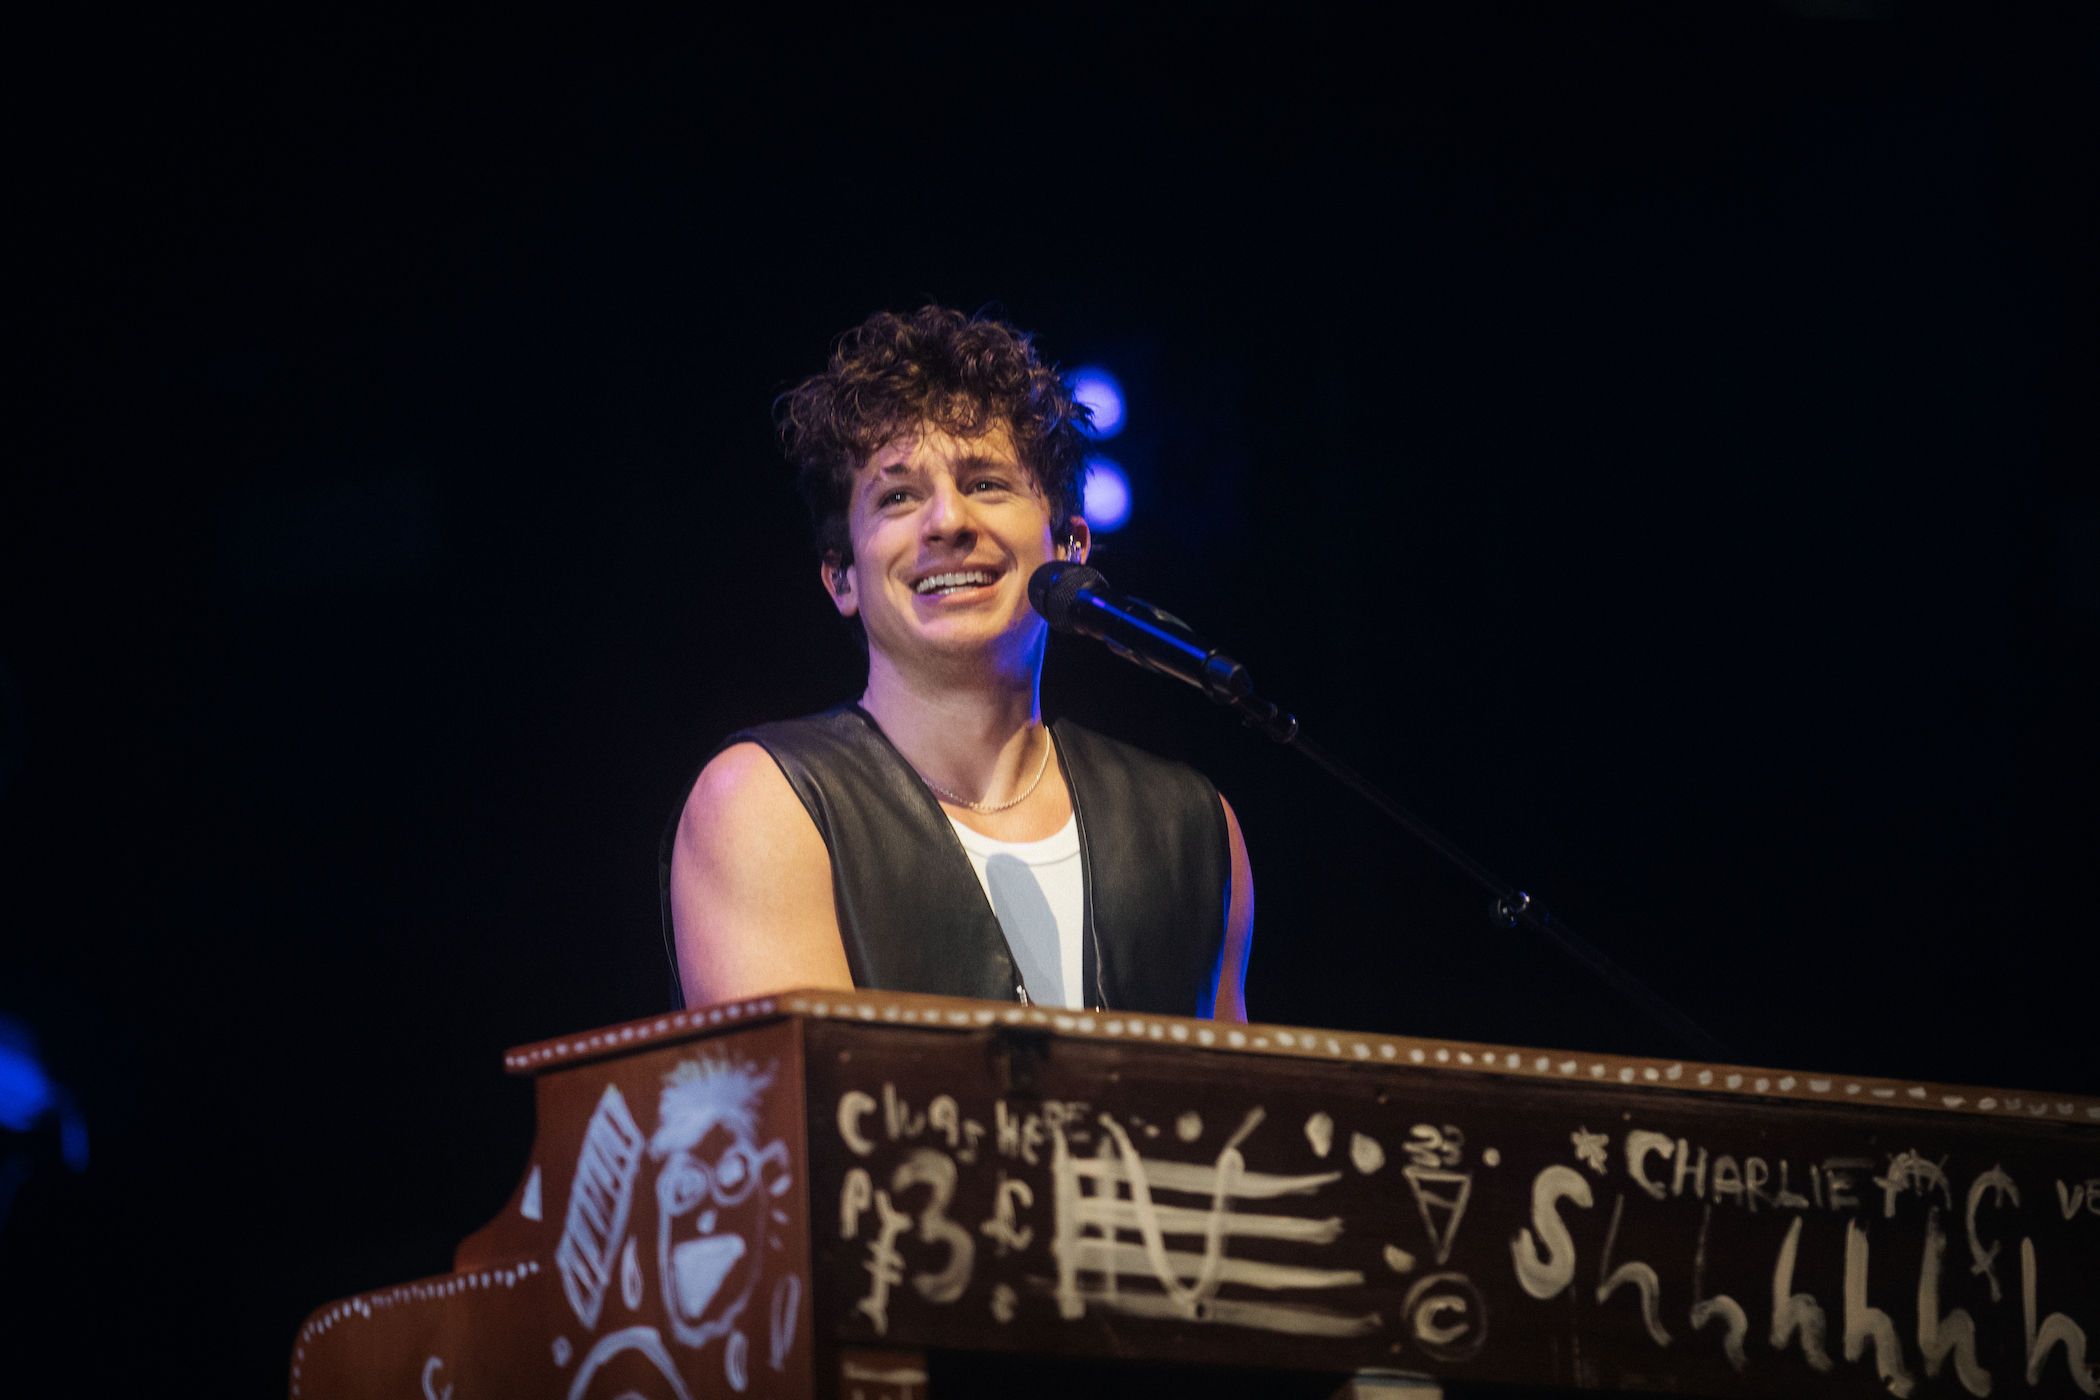 Charlie Puth live in Singapore Tour dates, ticket prices, venue, and more